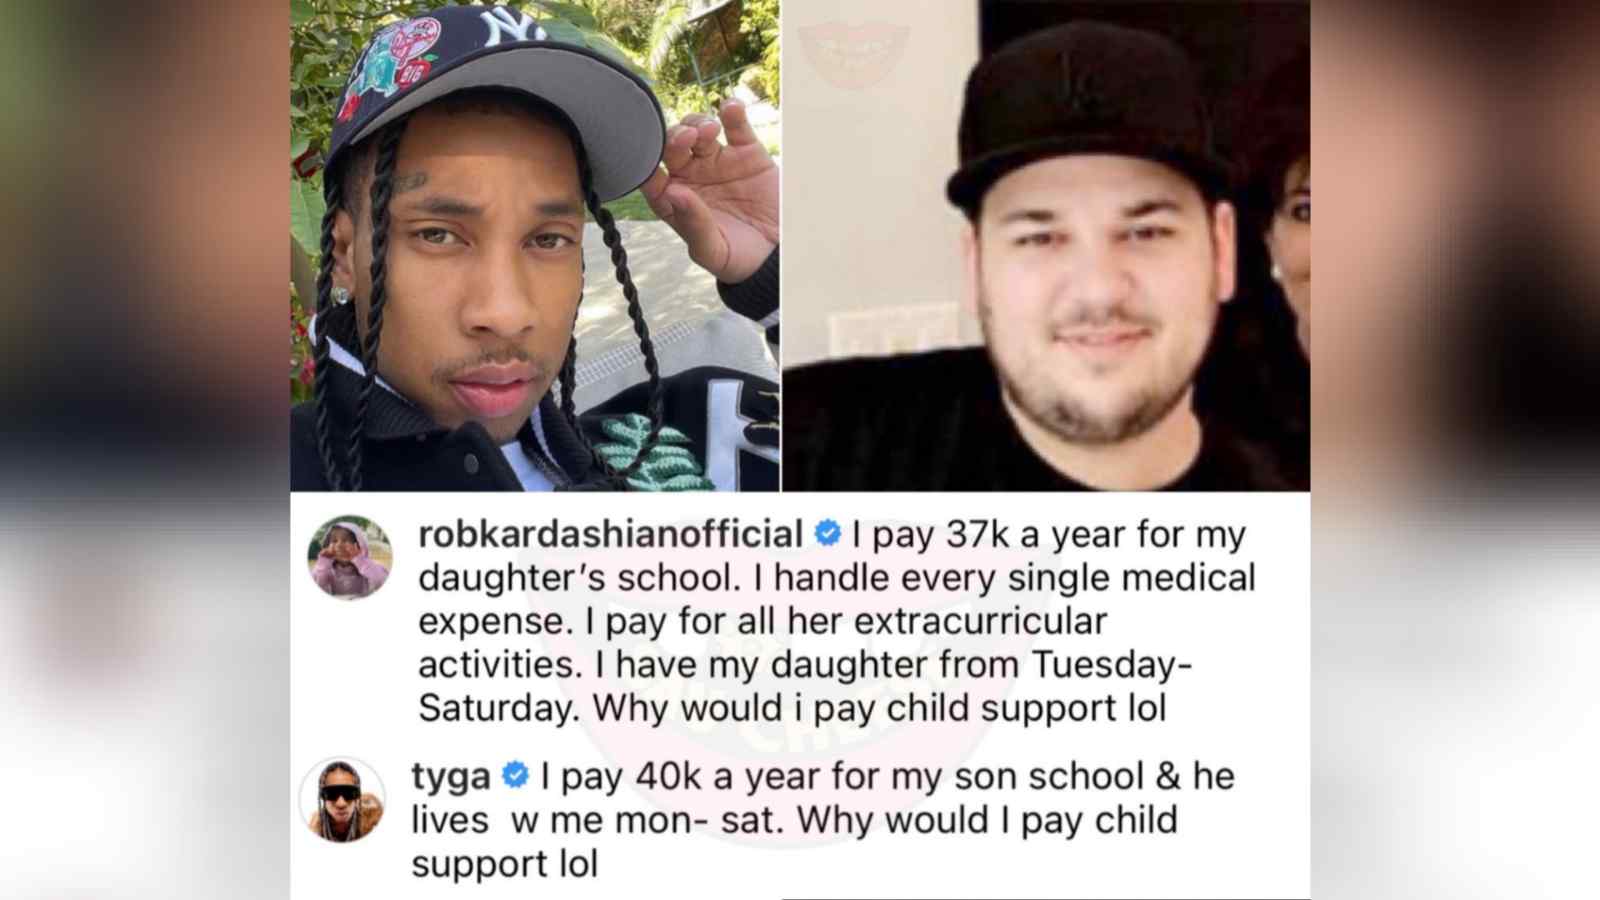 Tyga & Rob Kardashian commented on the claims made by Blac Chyna